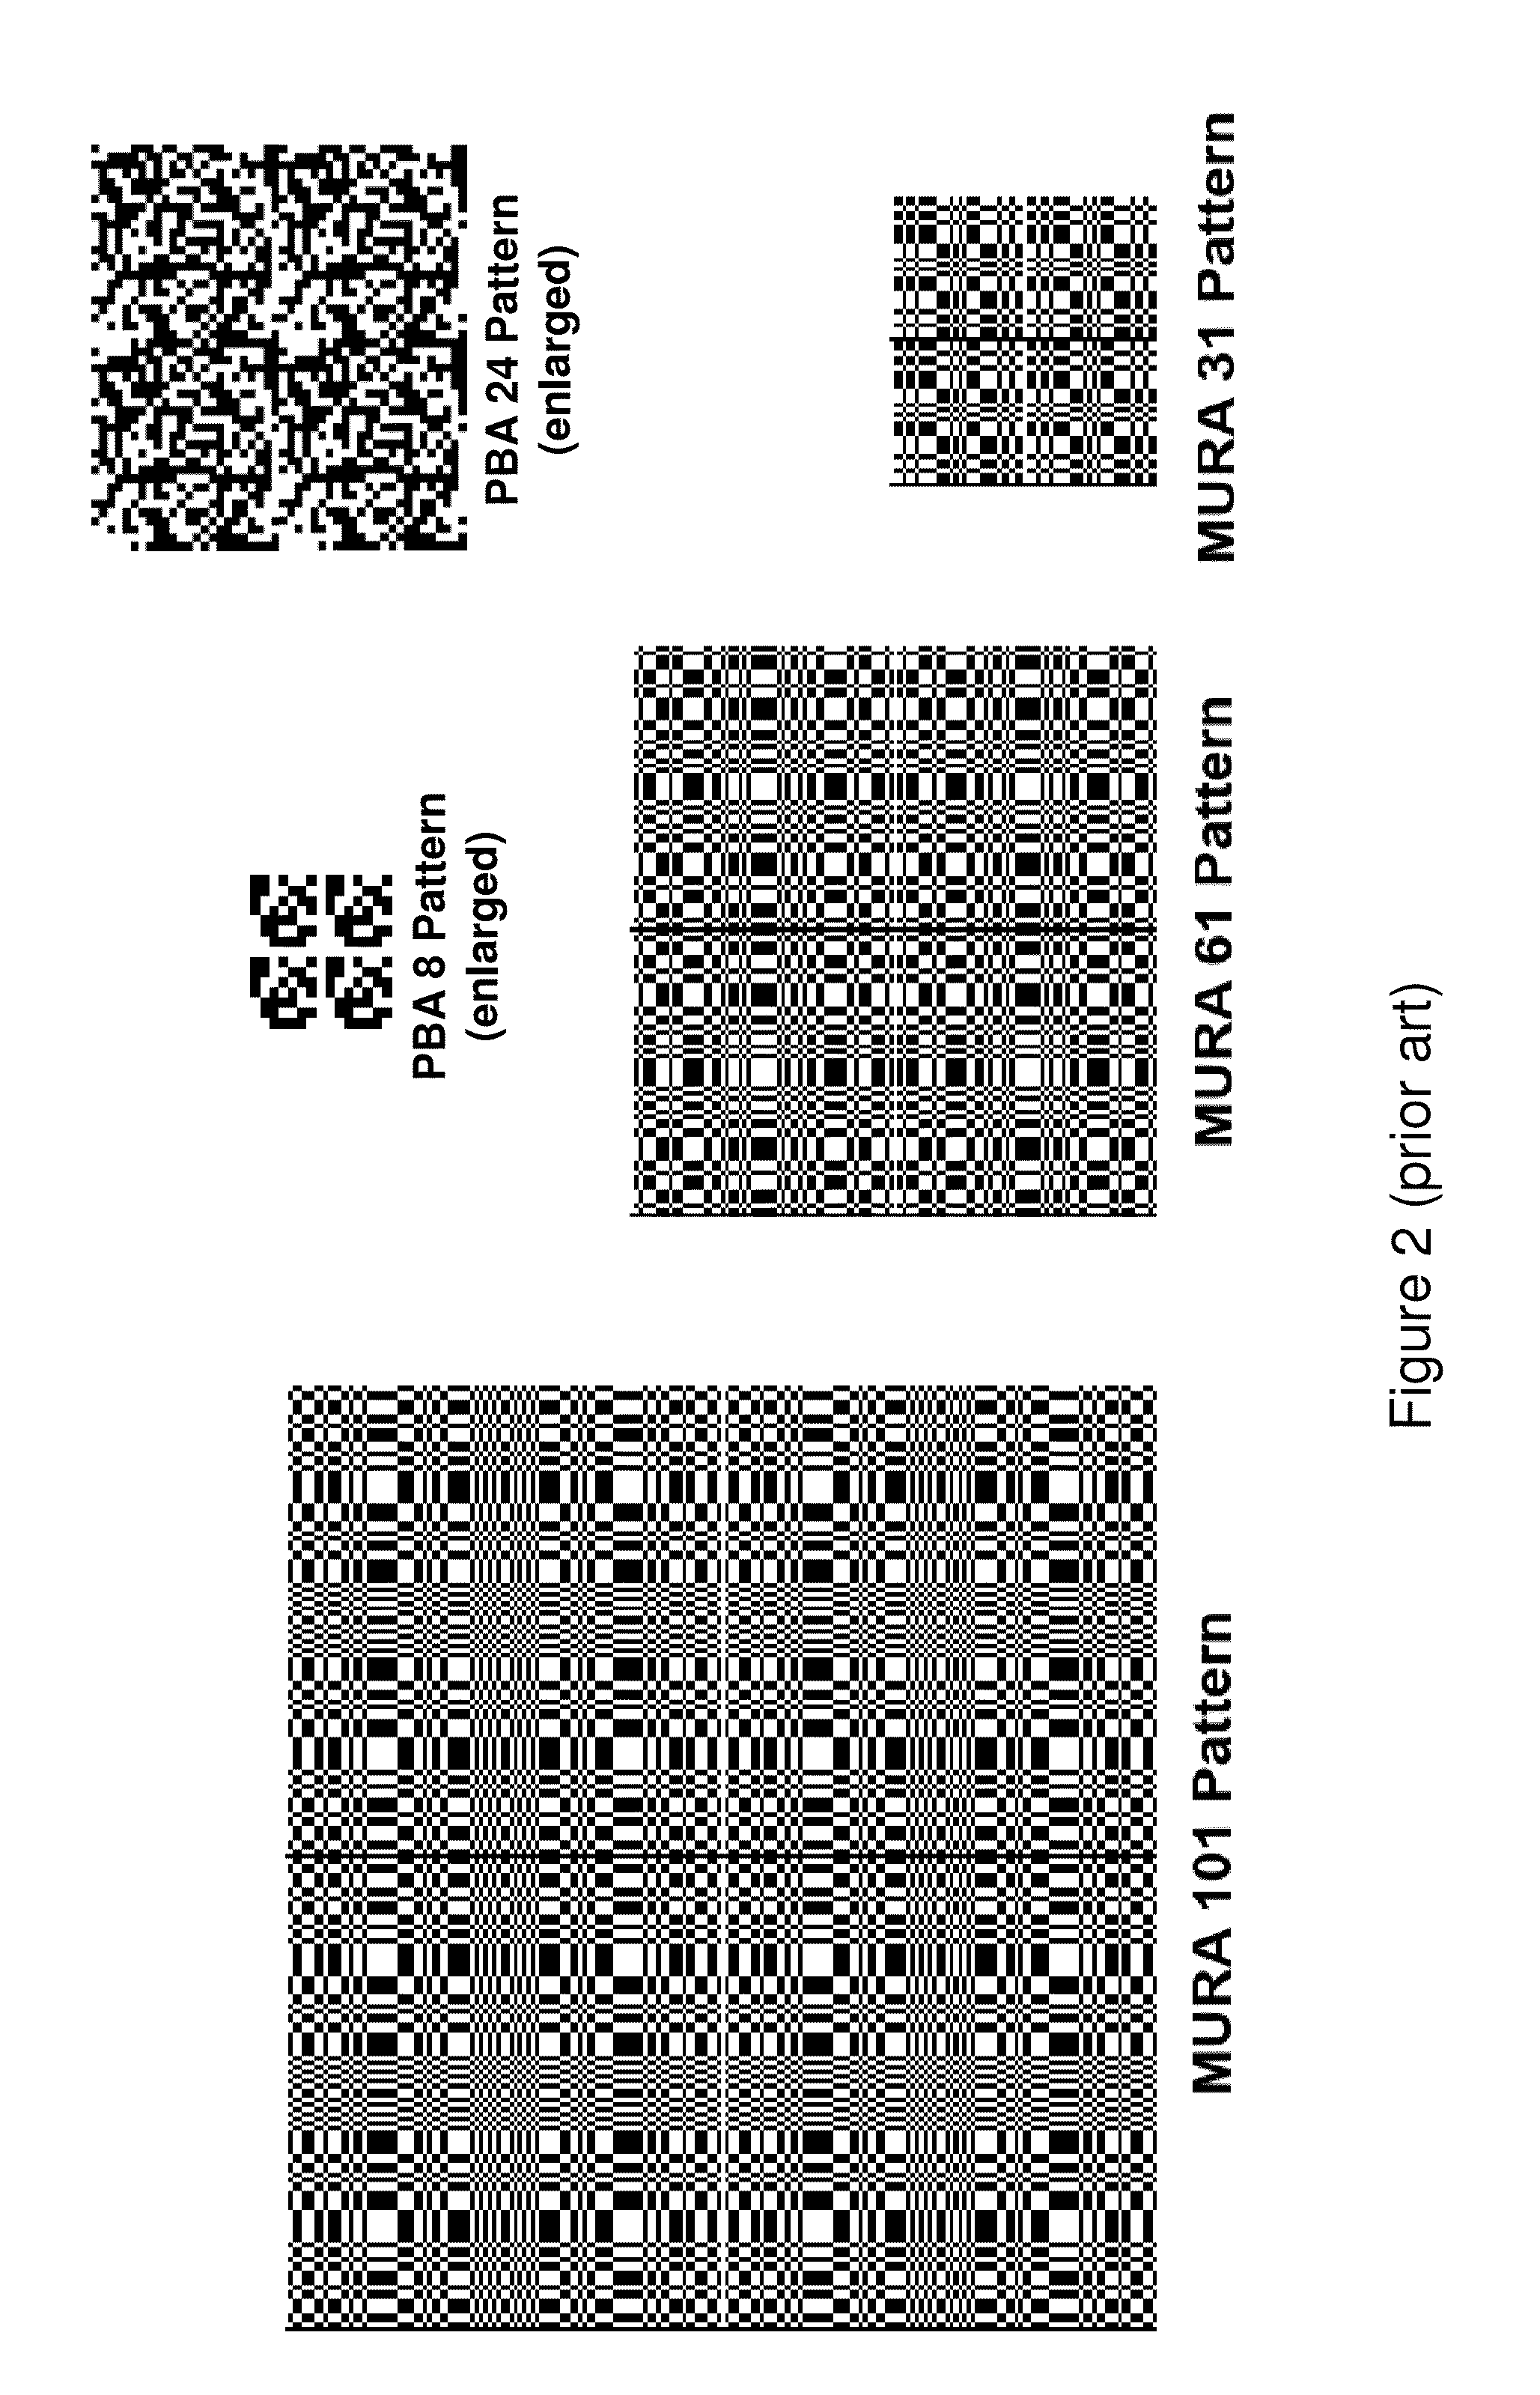 Apparatus and method for capturing still images and video using coded lens imaging techniques